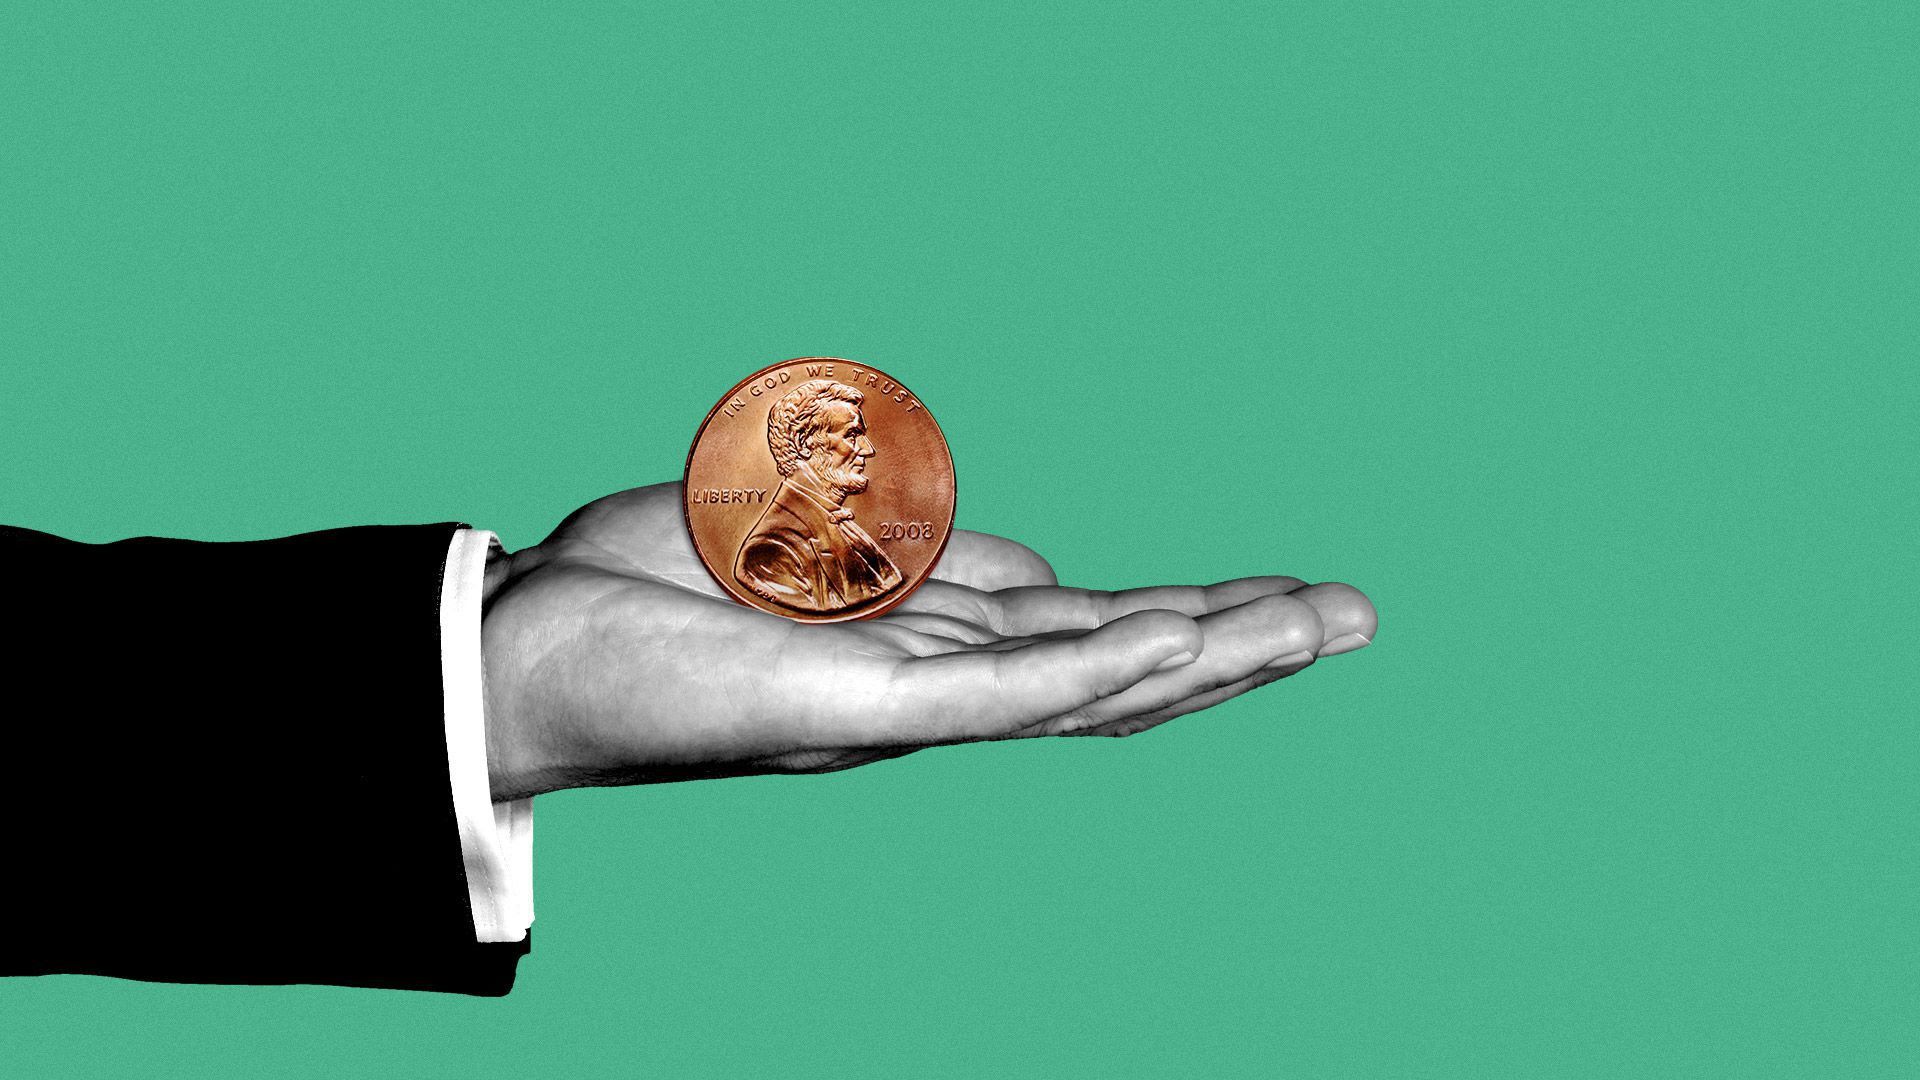 An illustration of someone holding a coin.